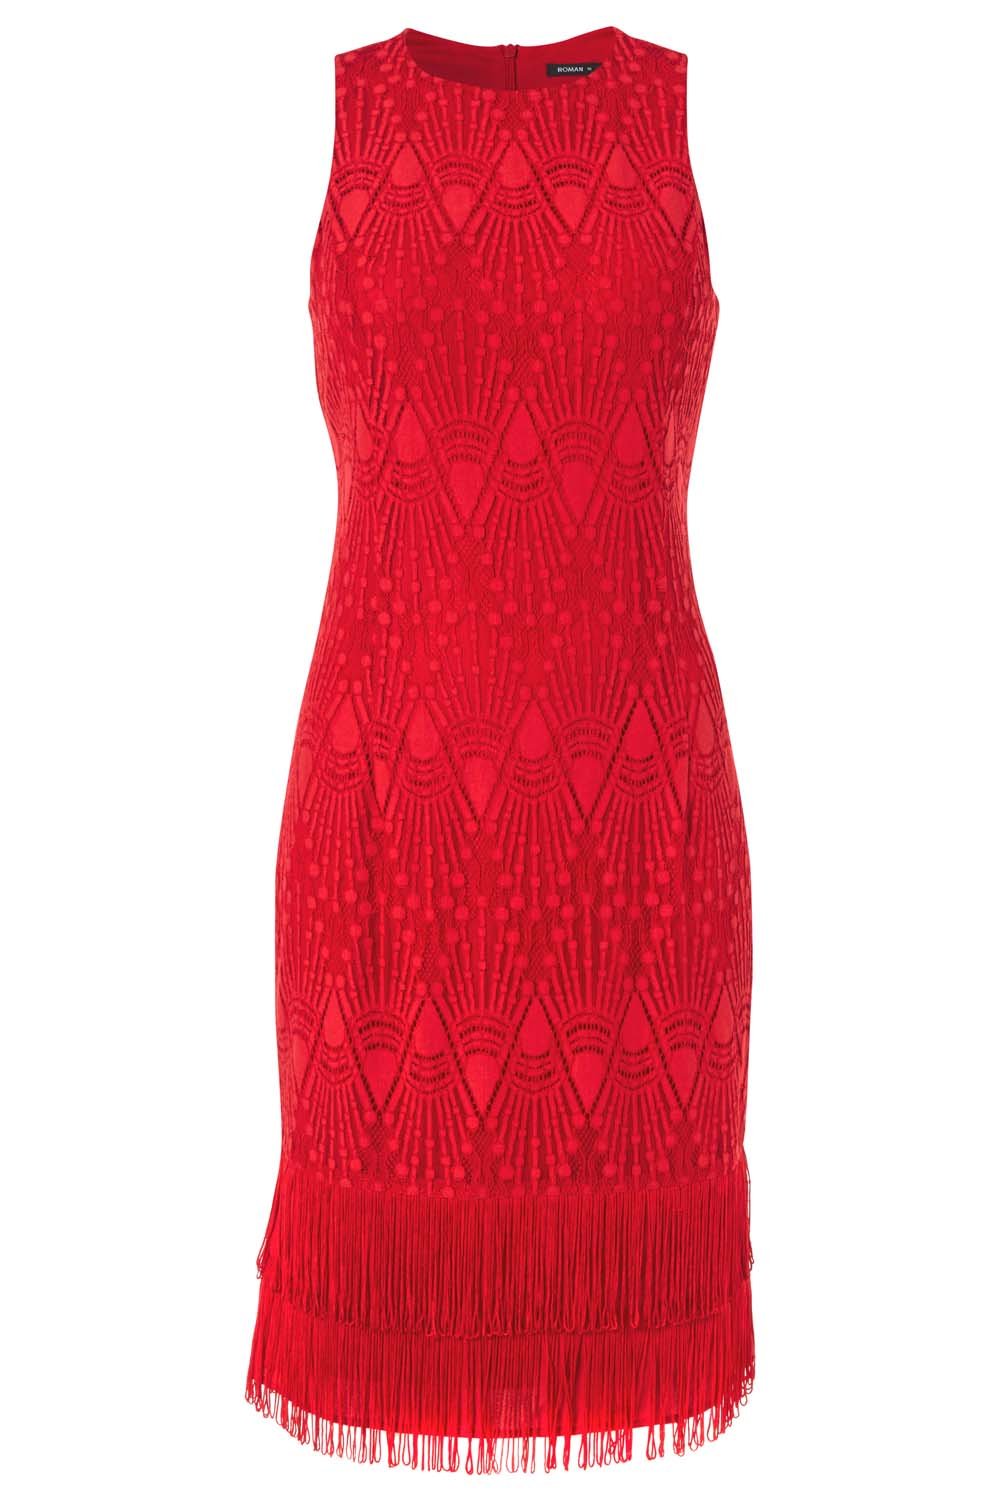 Red Lace Tassel Sleeveless Flapper Dress, Image 5 of 5